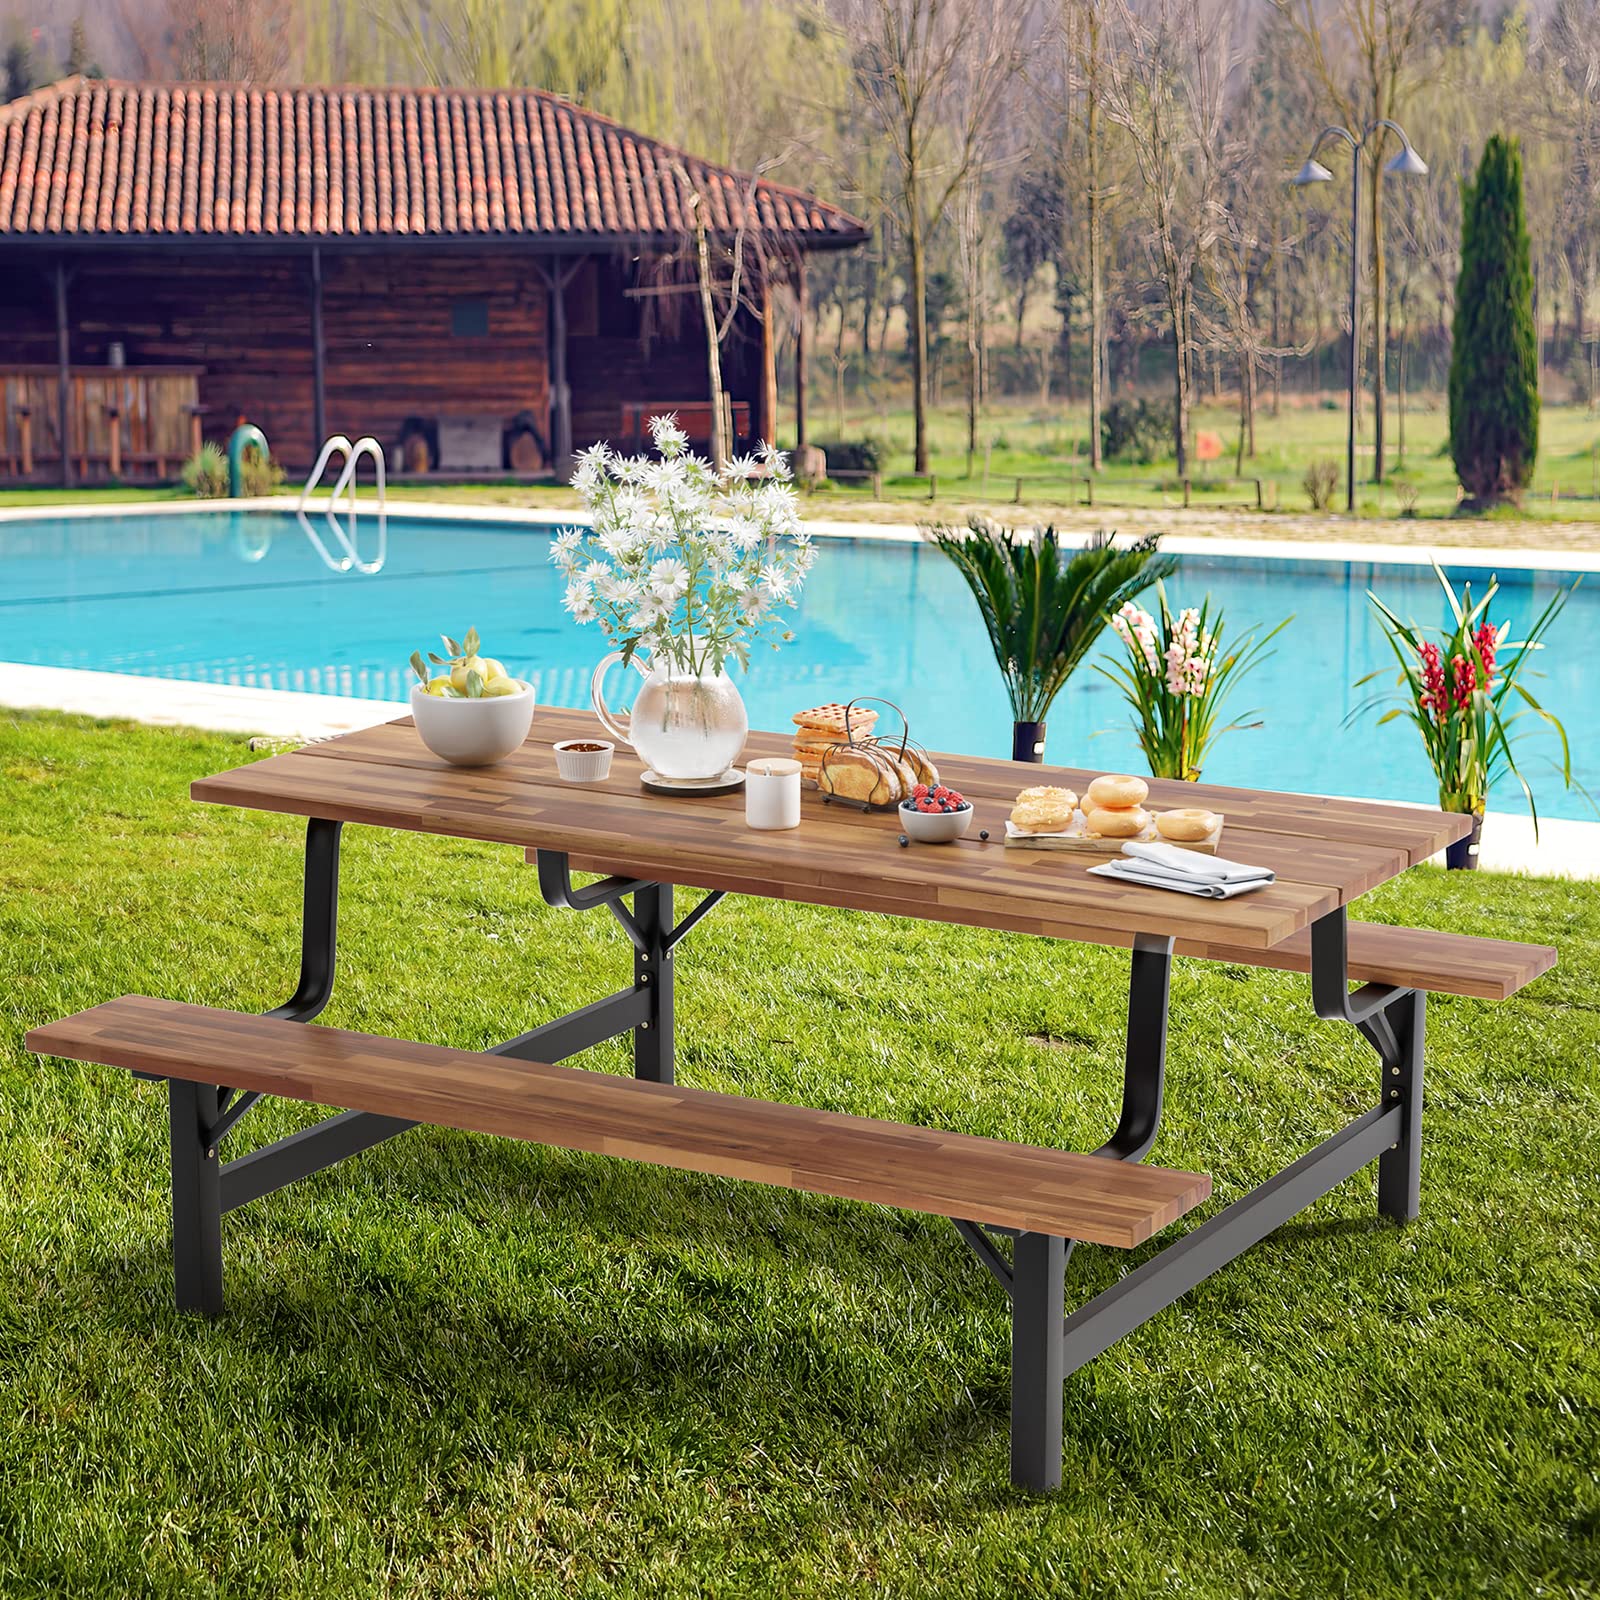 Giantex Picnic Table Bench Set for 6 or 4 Persons